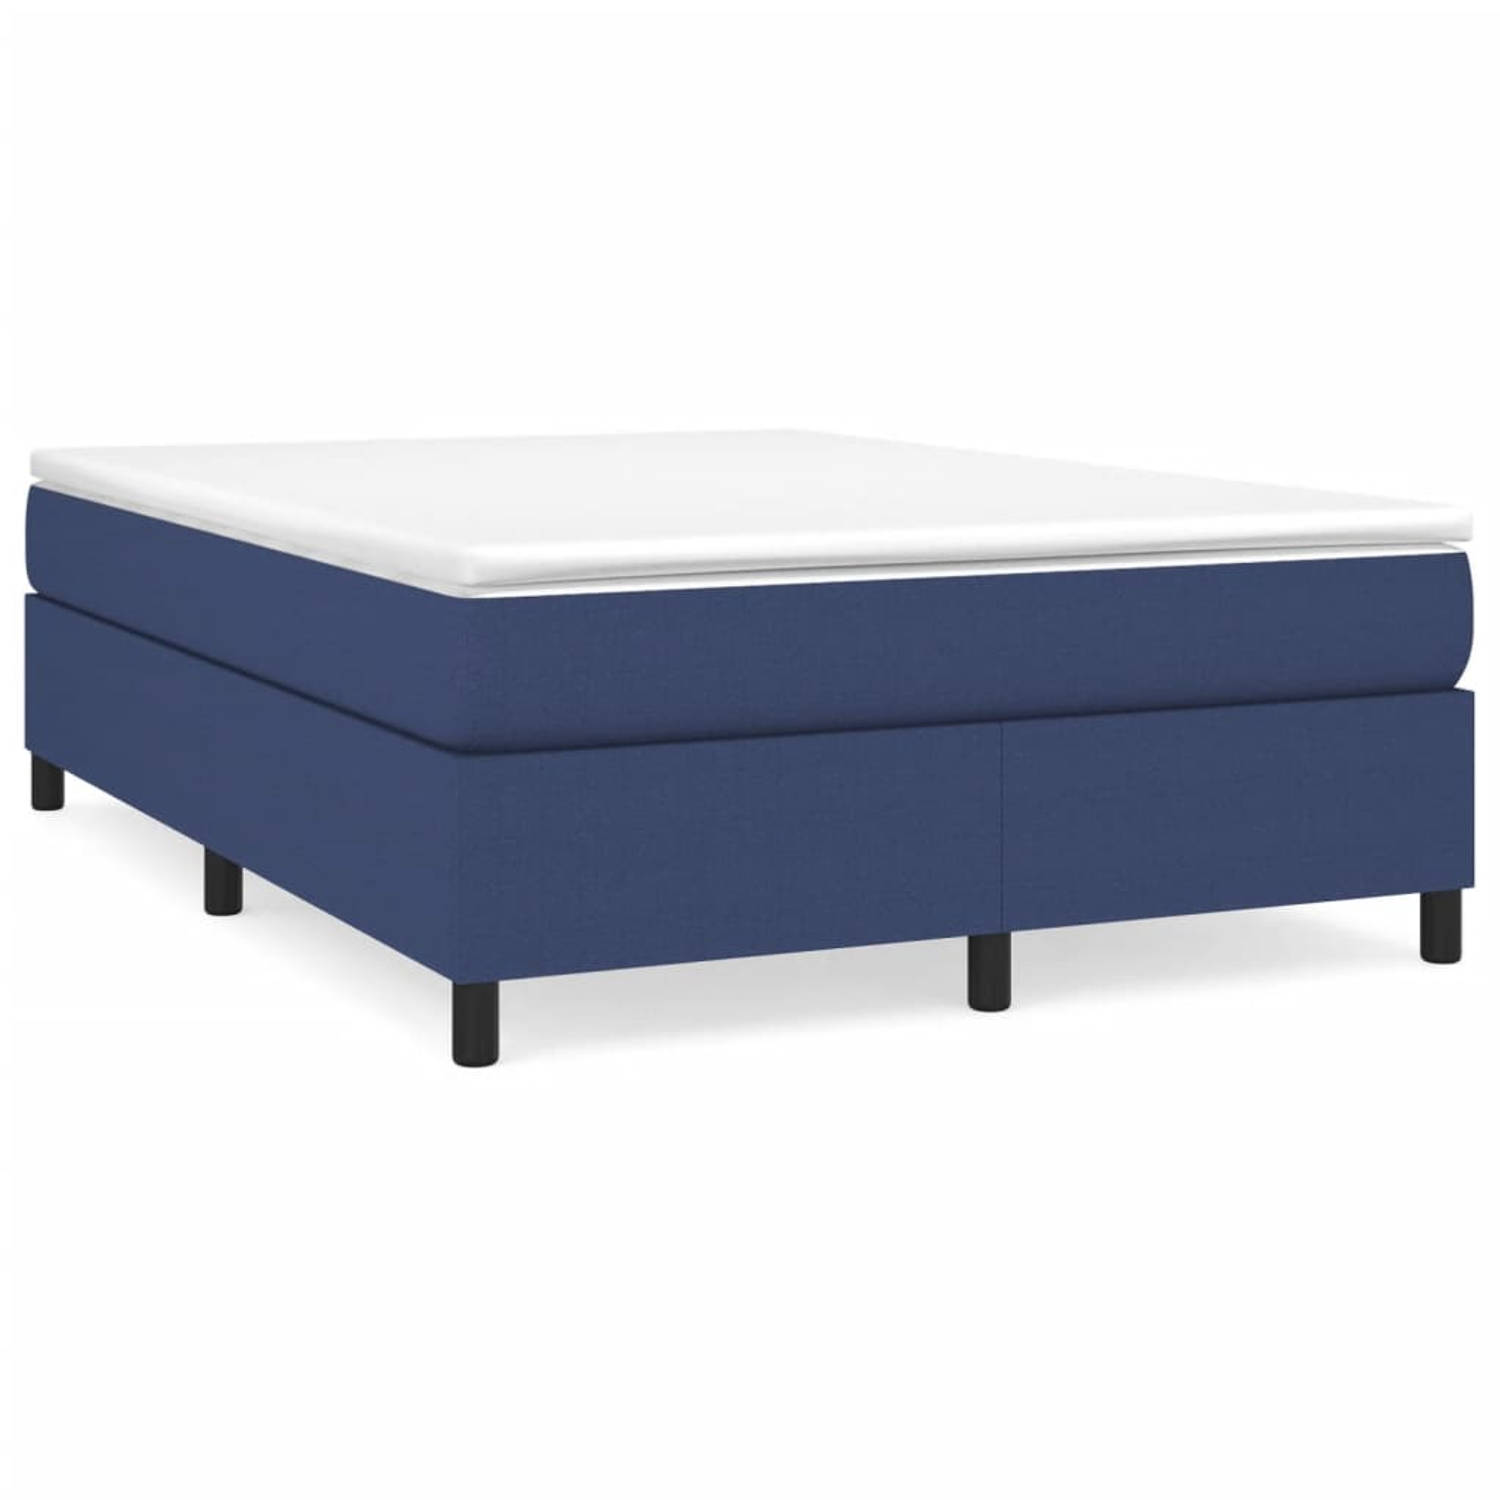 The Living Store Boxspringframe stof blauw 140x200 cm - Boxspringframe - Boxspringframes - Bed - Ledikant - Slaapmeubel - Bedframe - Bedbodem - Tweepersoonsbed - Boxspring - Bedden